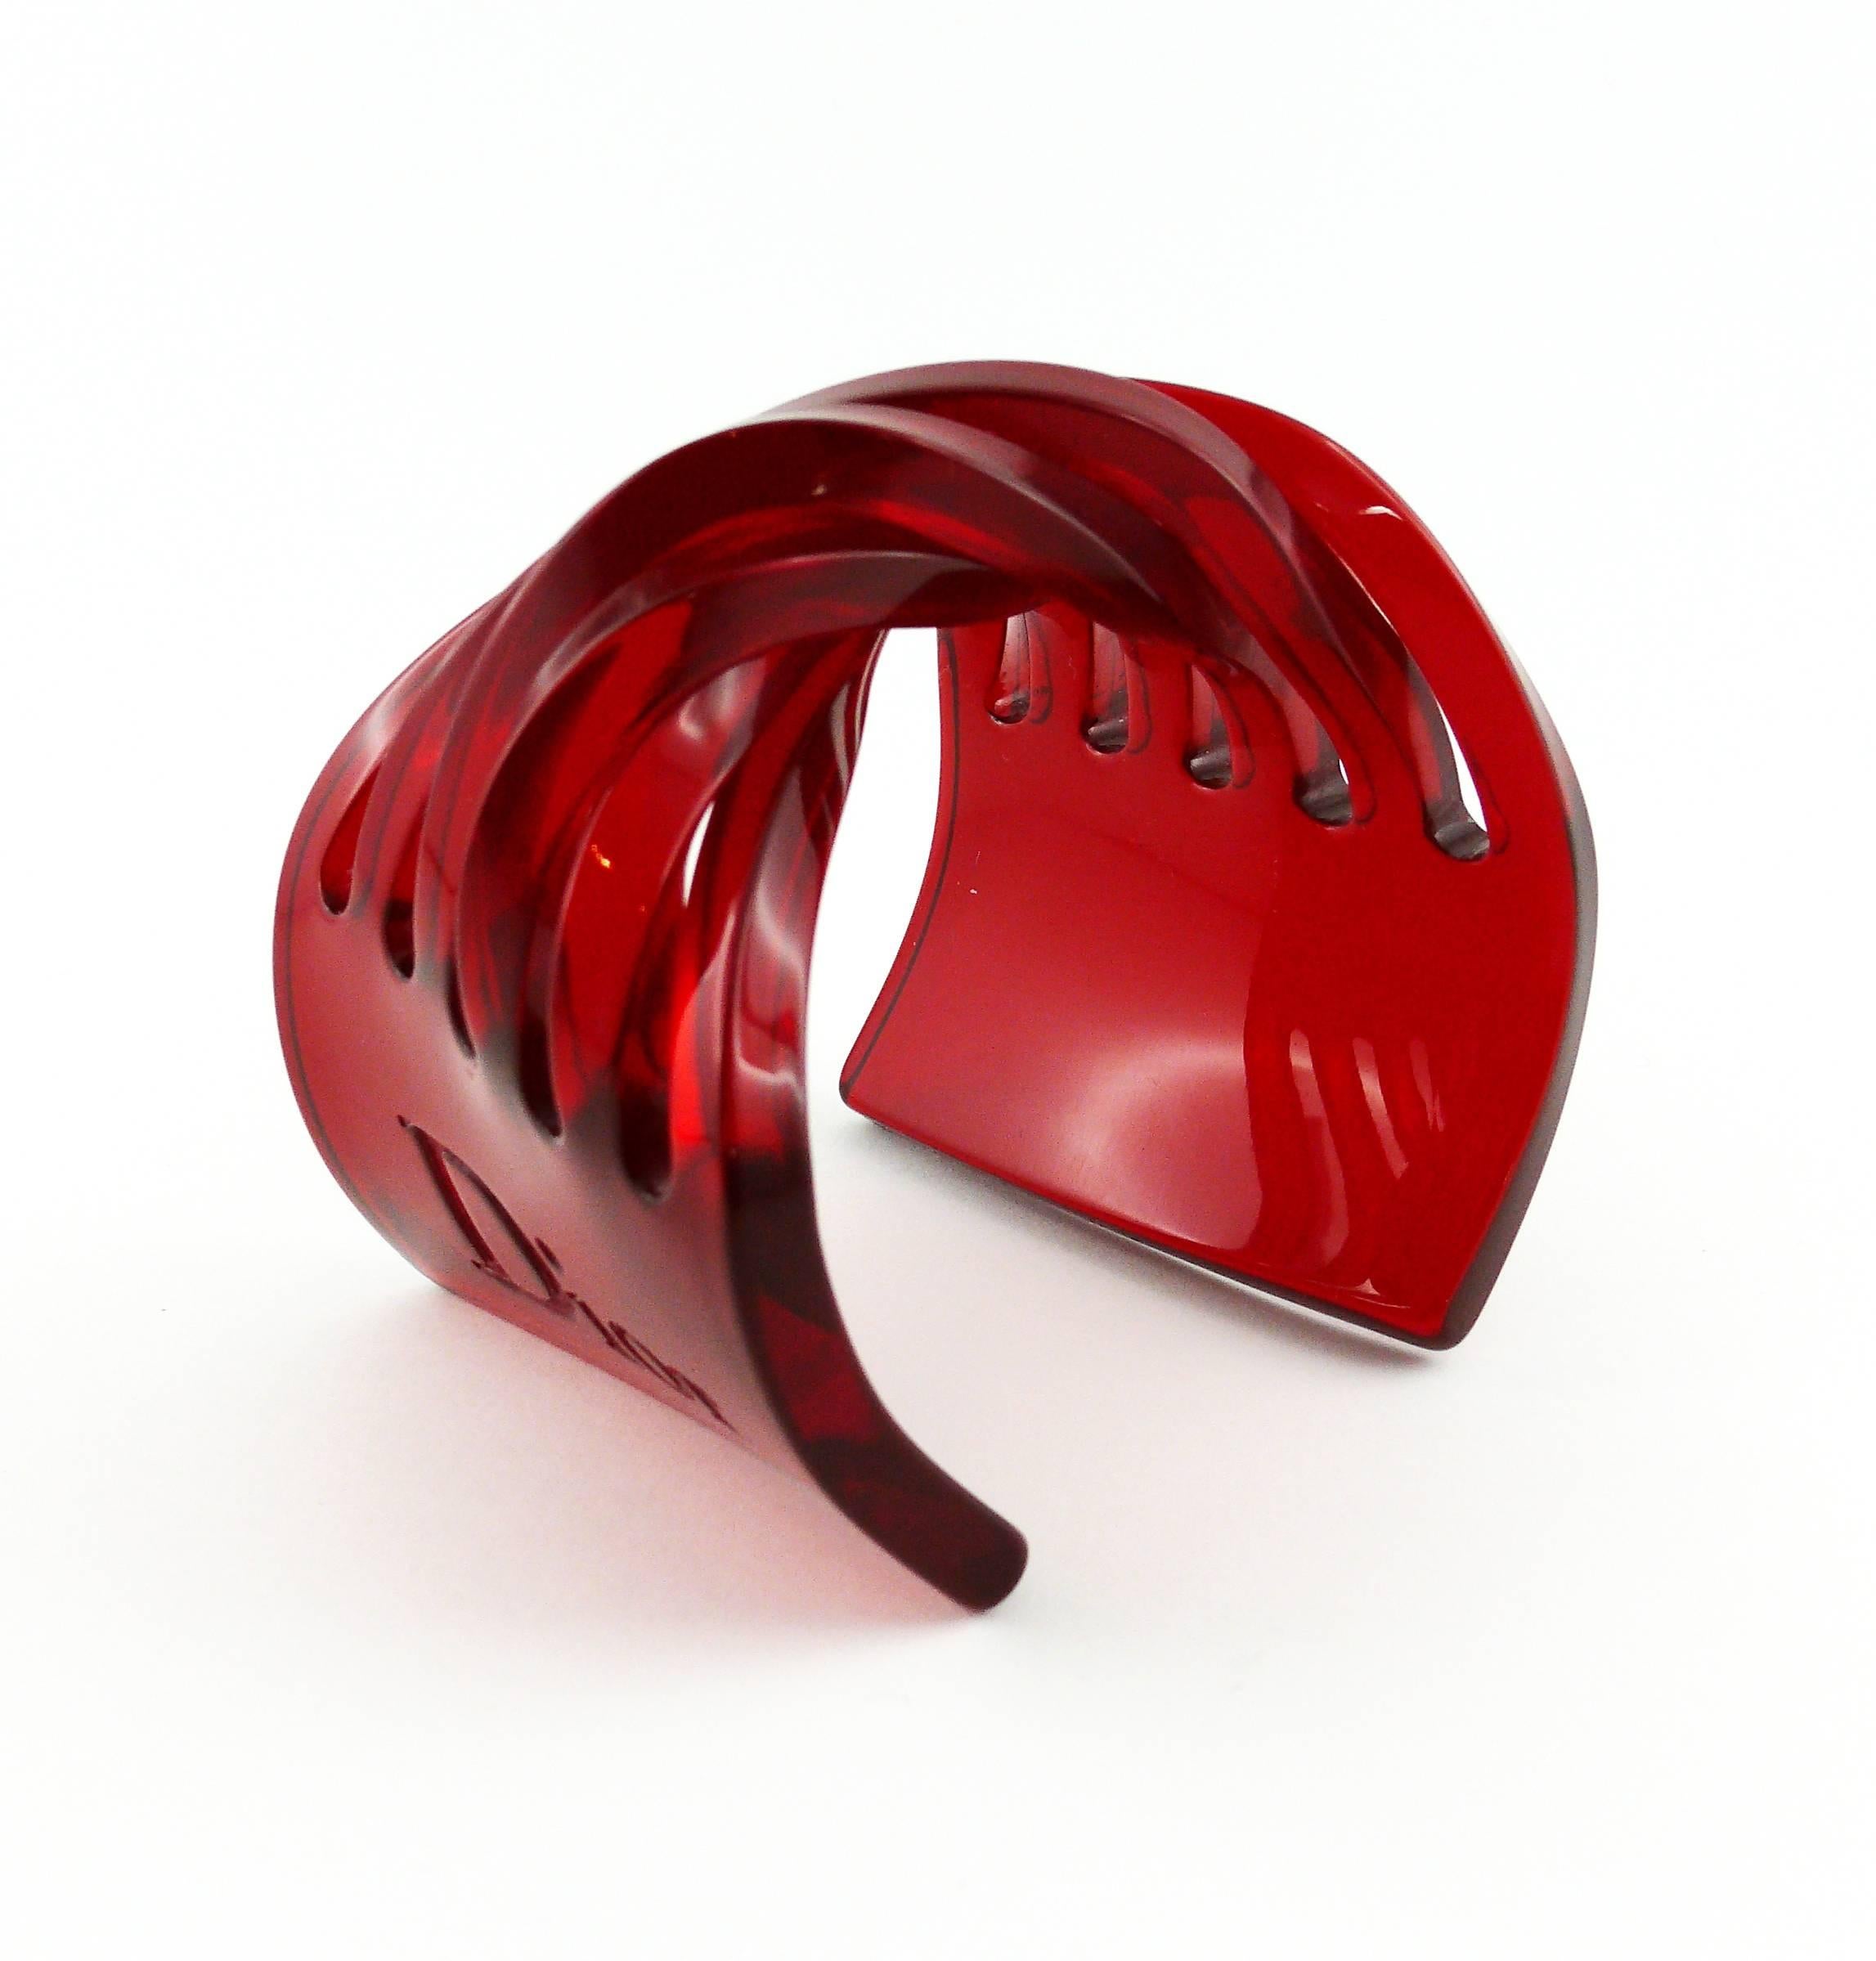 CHRISTIAN DIOR sculptural 3-D intertwined red lucite cuff bracelet.

Embossed DIOR on one side.

Indicative measurements : inside circumference approx. 20.11 cm (7.92 inches) / width approx 8 cm / length approx. 6.7 cm (2.64 inches) / wrist